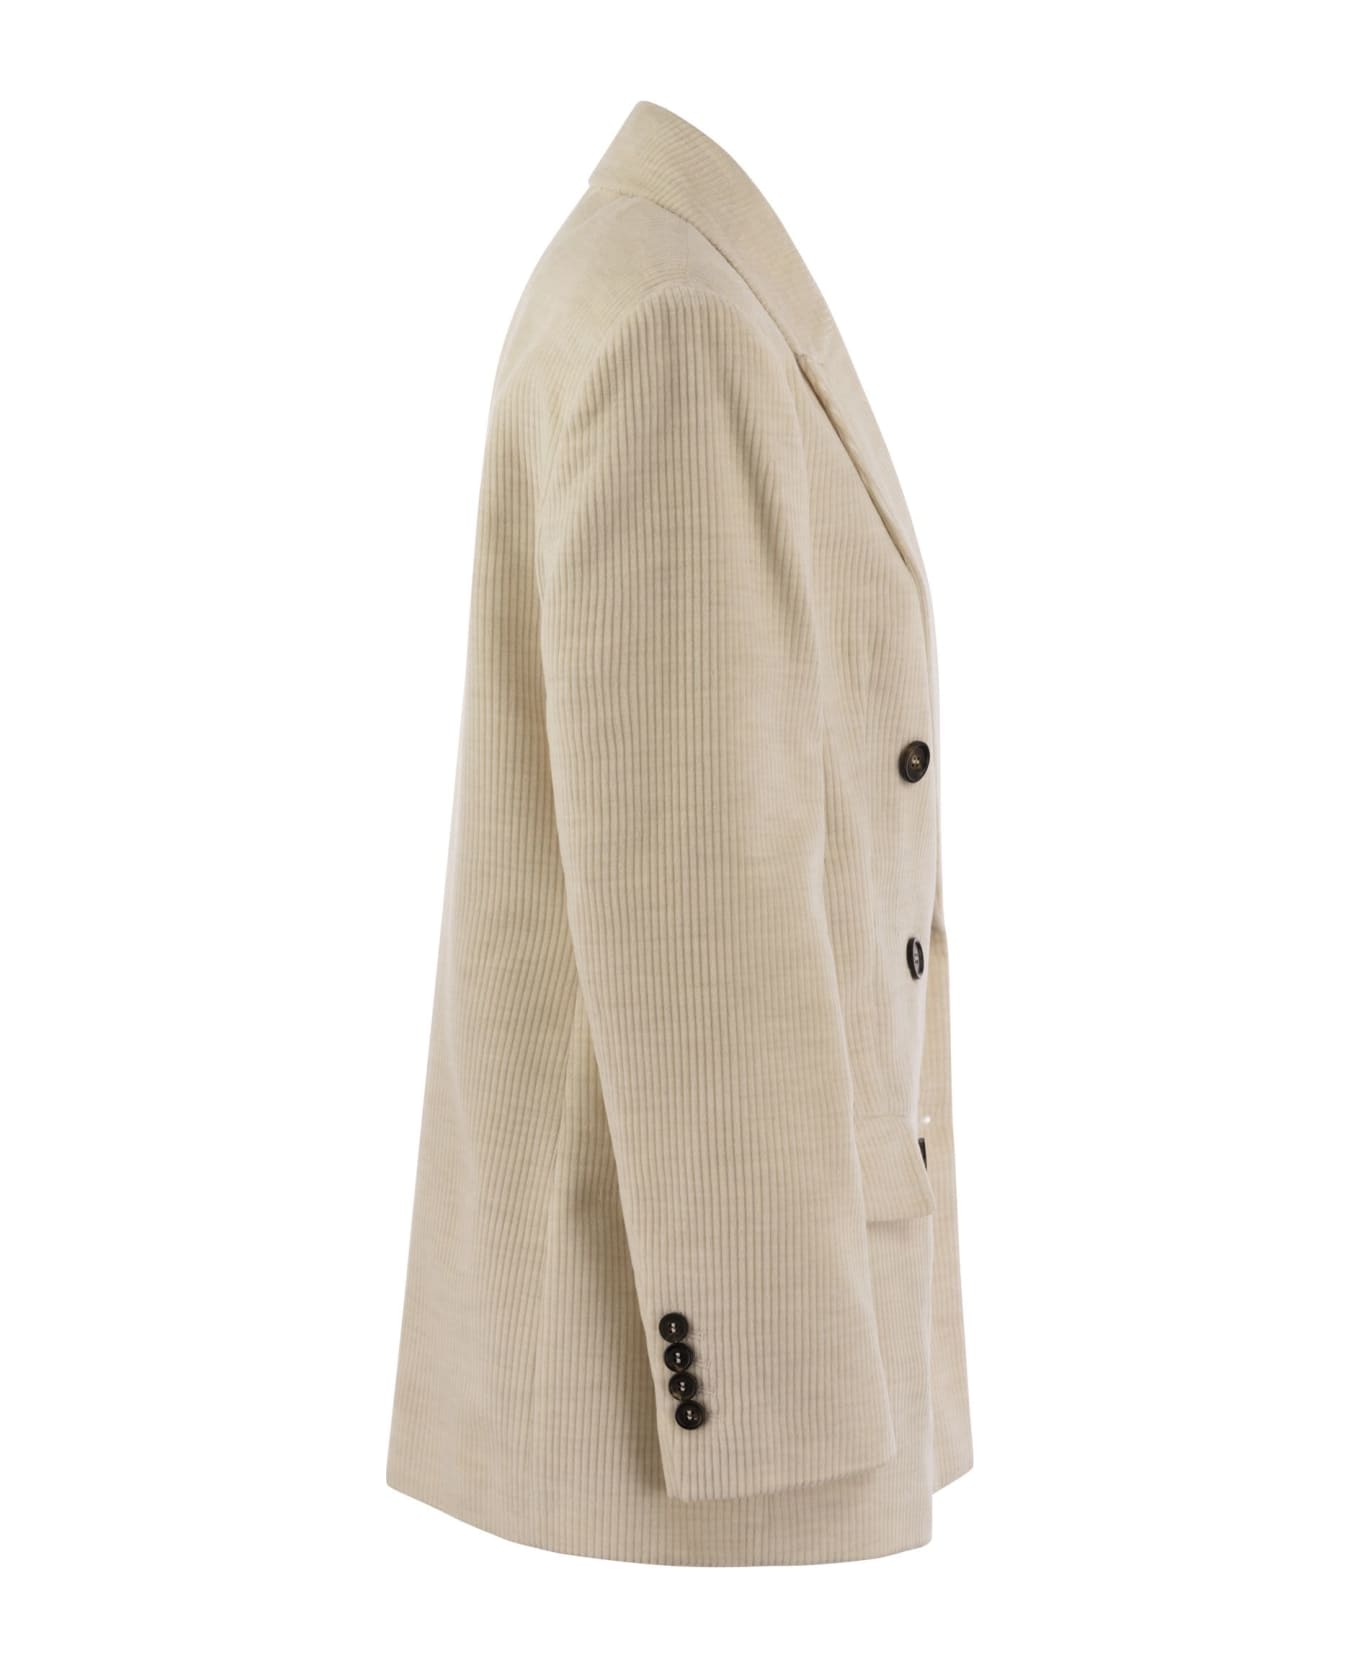 Brunello Cucinelli Viscose And Cotton Corduroy Jacket With Necklace - Ivory